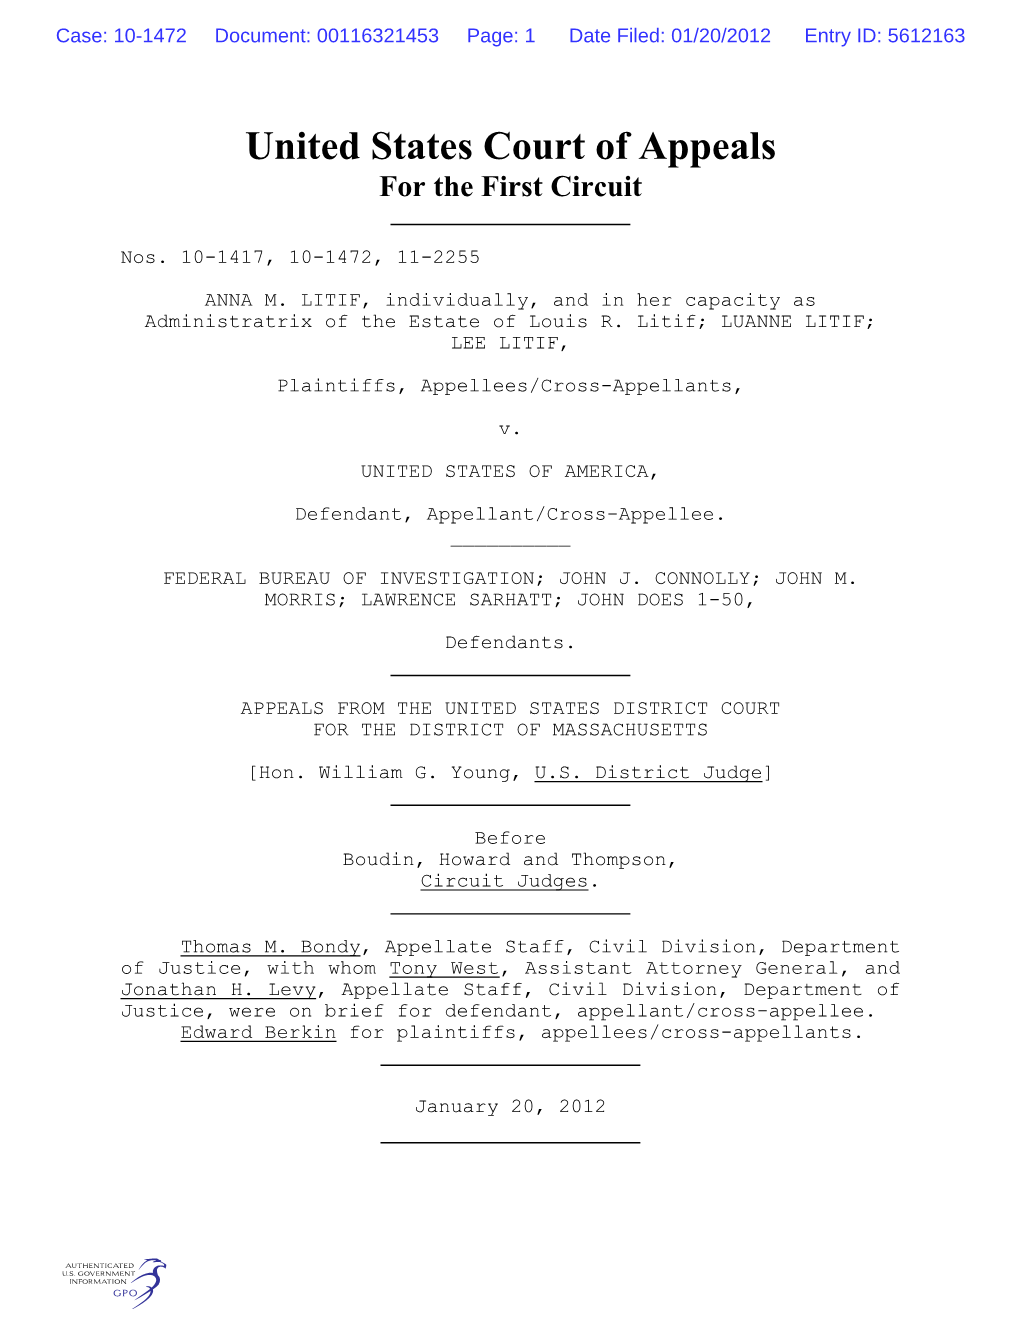 United States Court of Appeals for the First Circuit